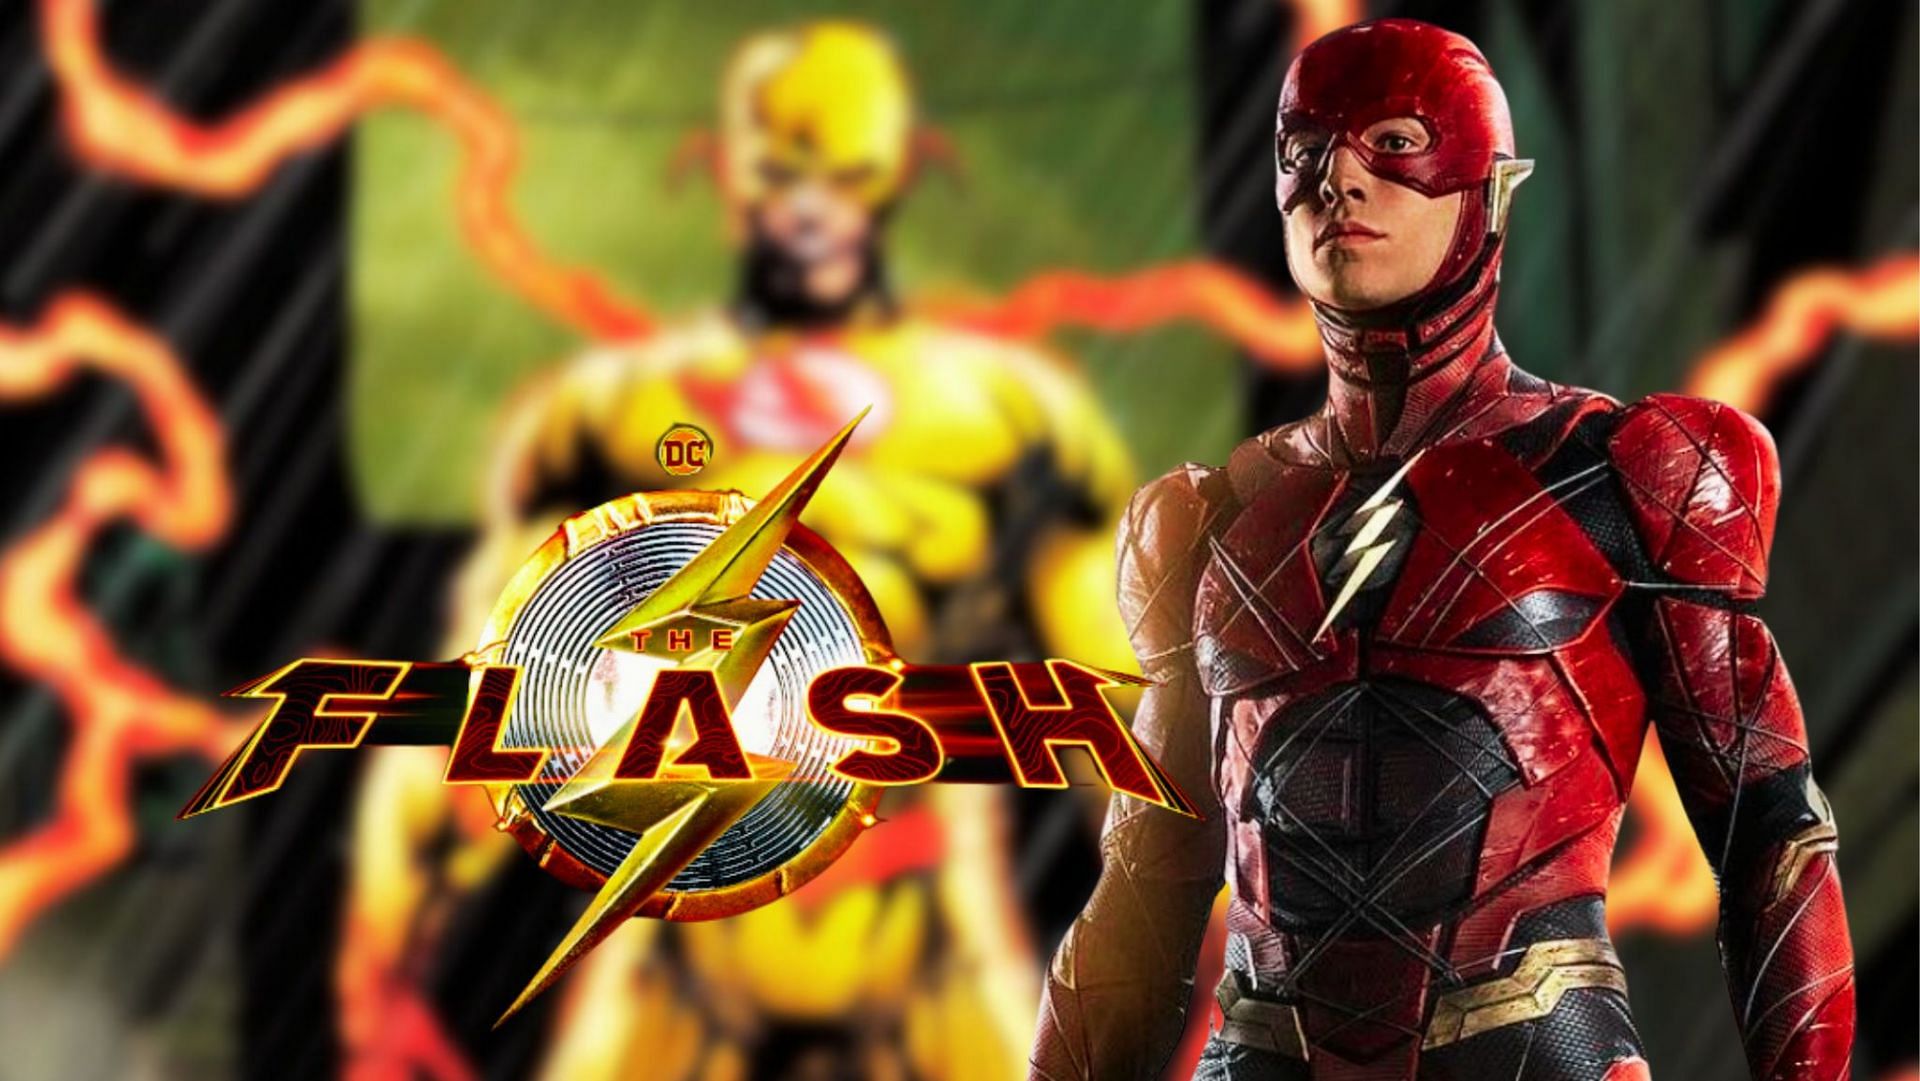 Is the Reverse Flash coming to the big screen?&quot; - Fans speculate on the possible appearance of the classic Flash villain in the upcoming movie (Image via Sportskeeda)